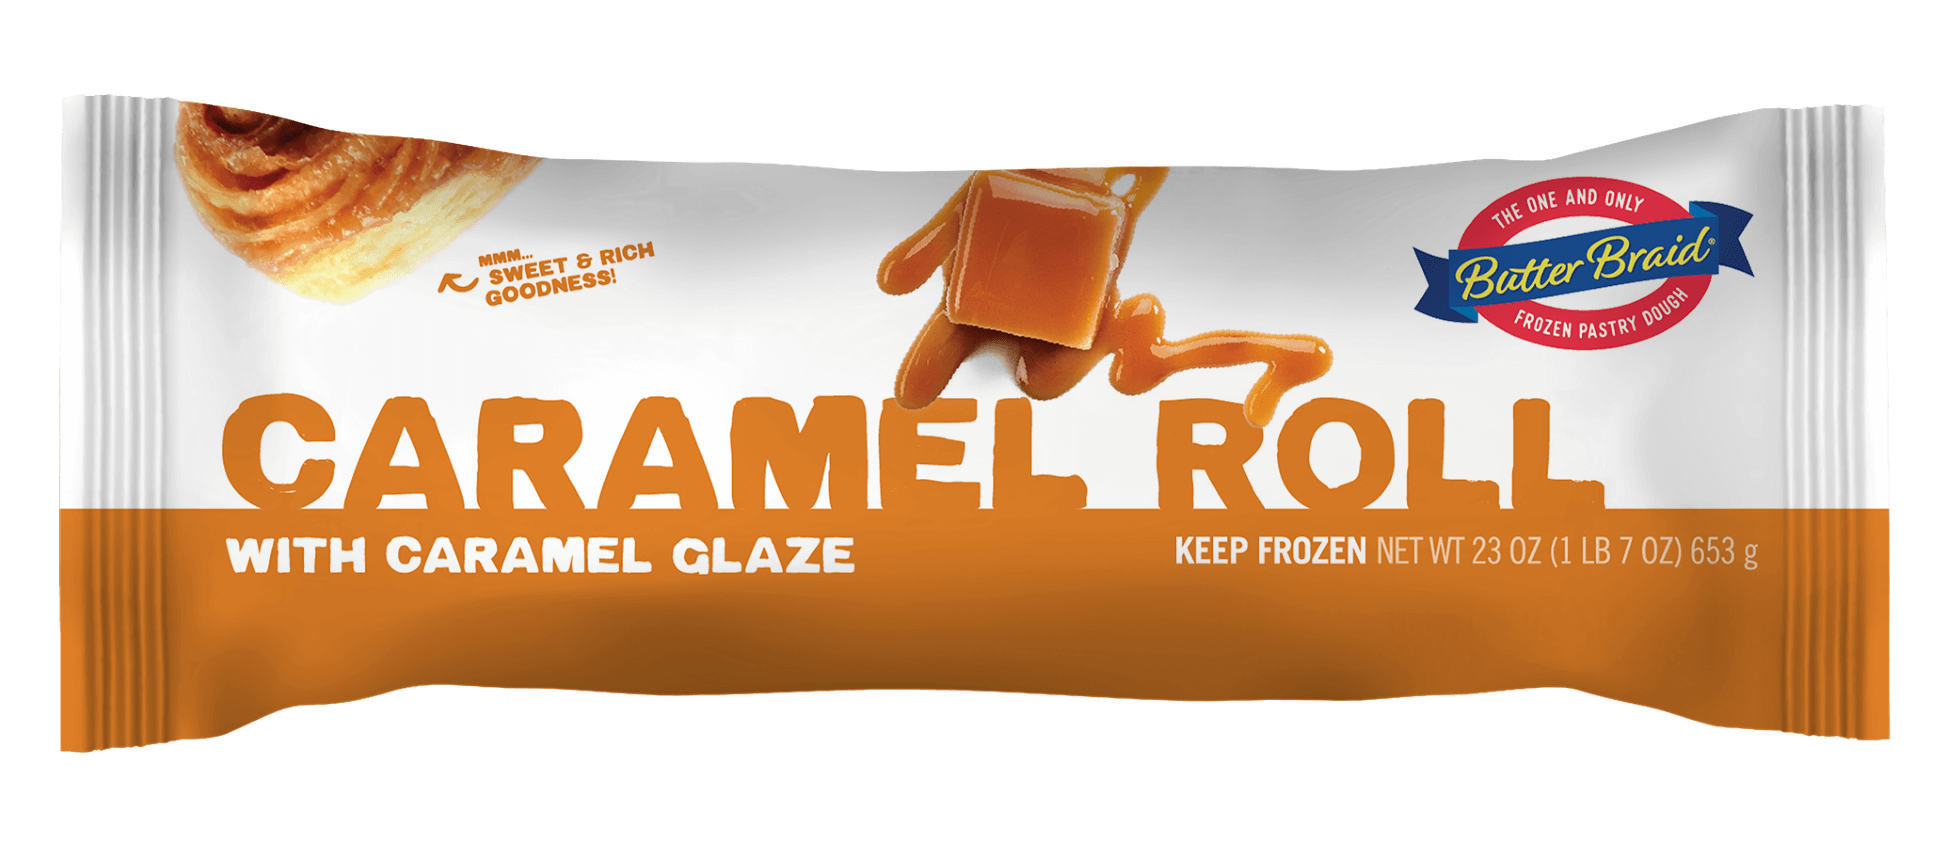 Caramel Pastry Roll packaging